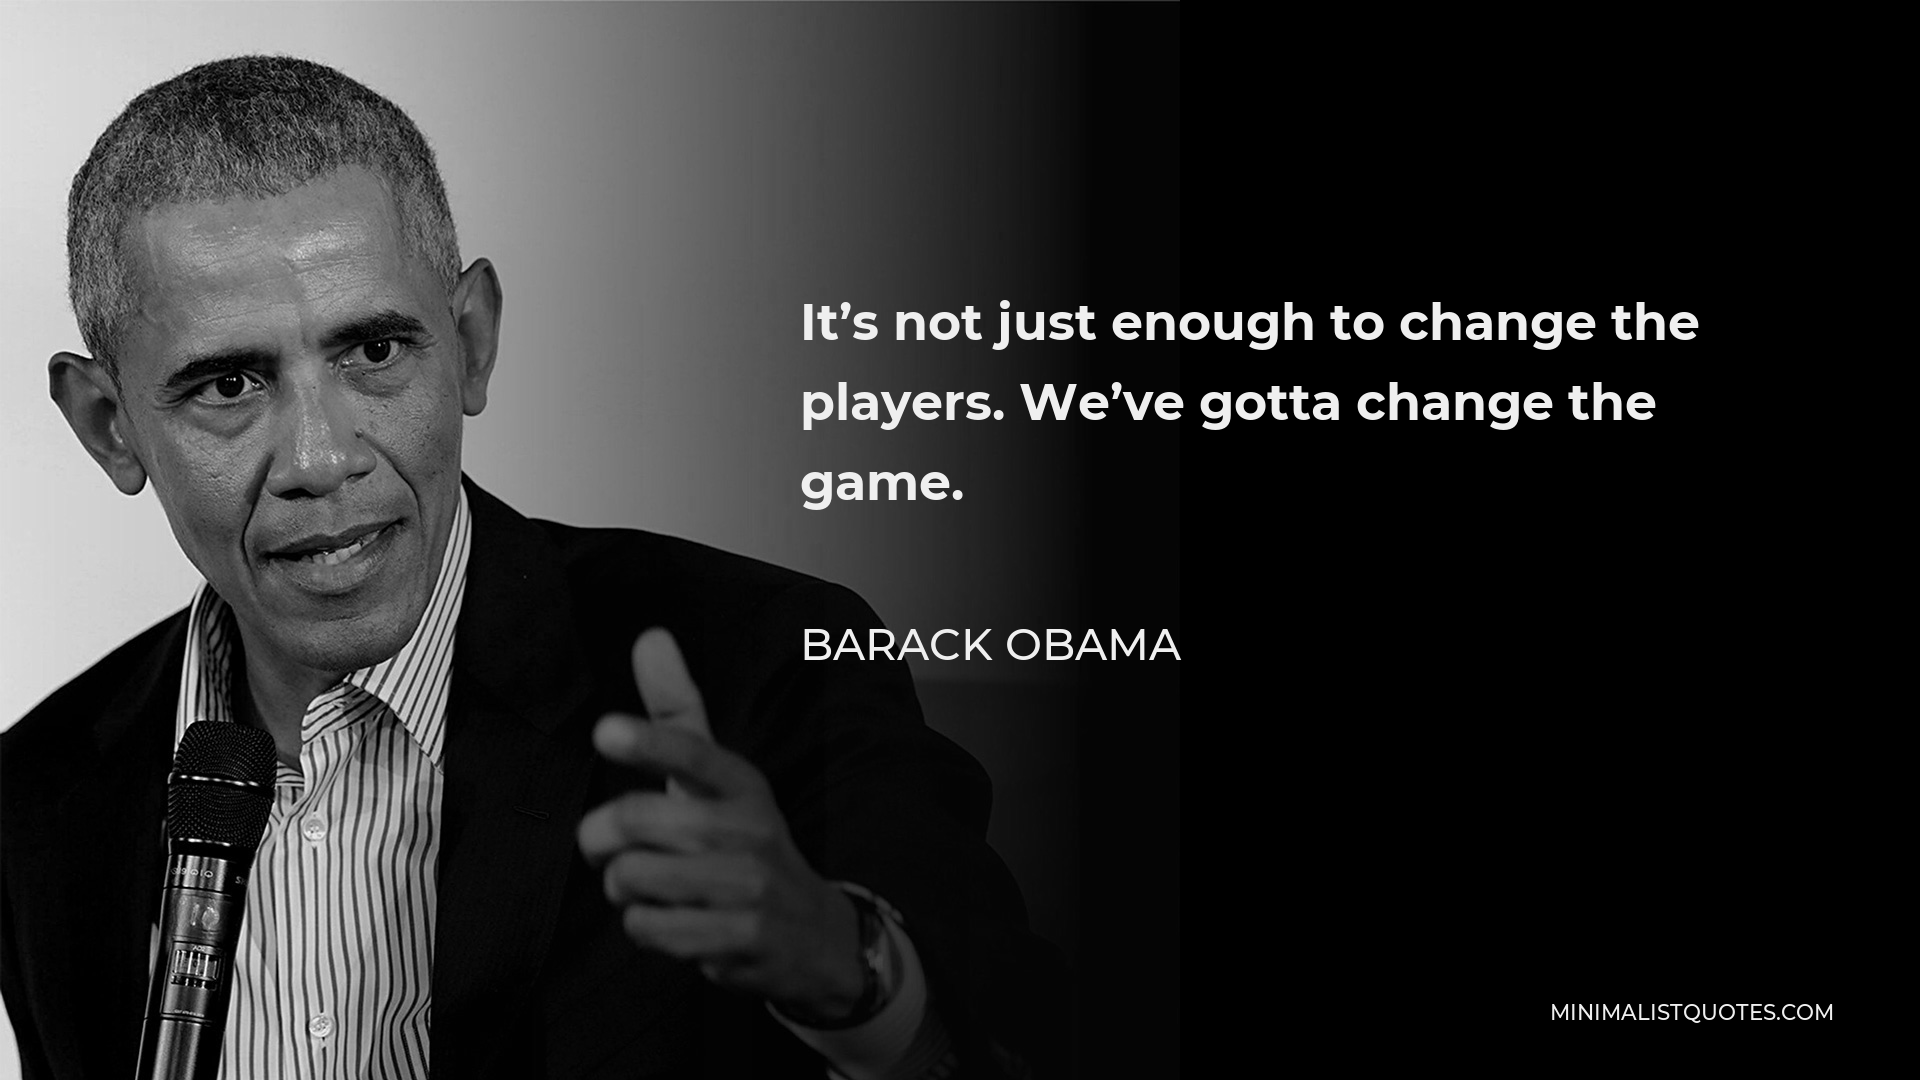 Barack Obama Quote - It’s not just enough to change the players. We’ve gotta change the game.